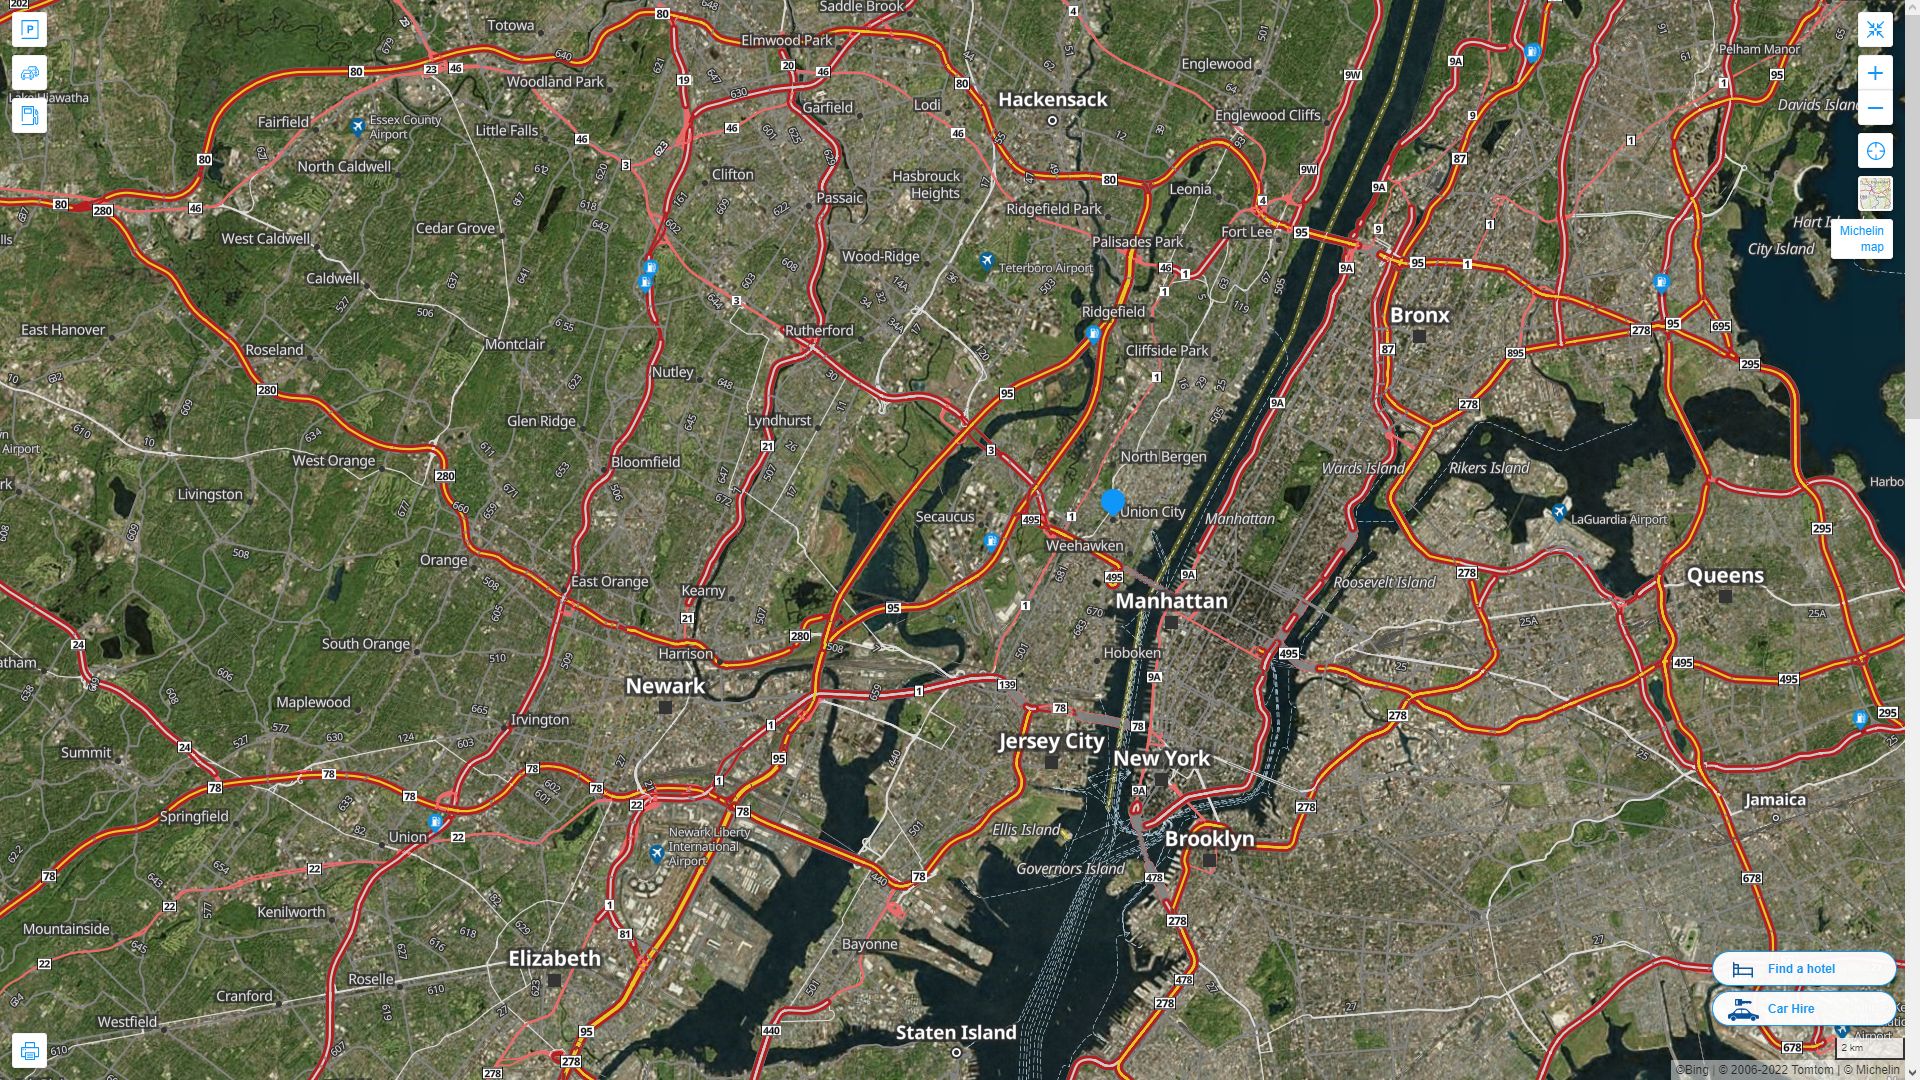 Union City New Jersey Highway and Road Map with Satellite View